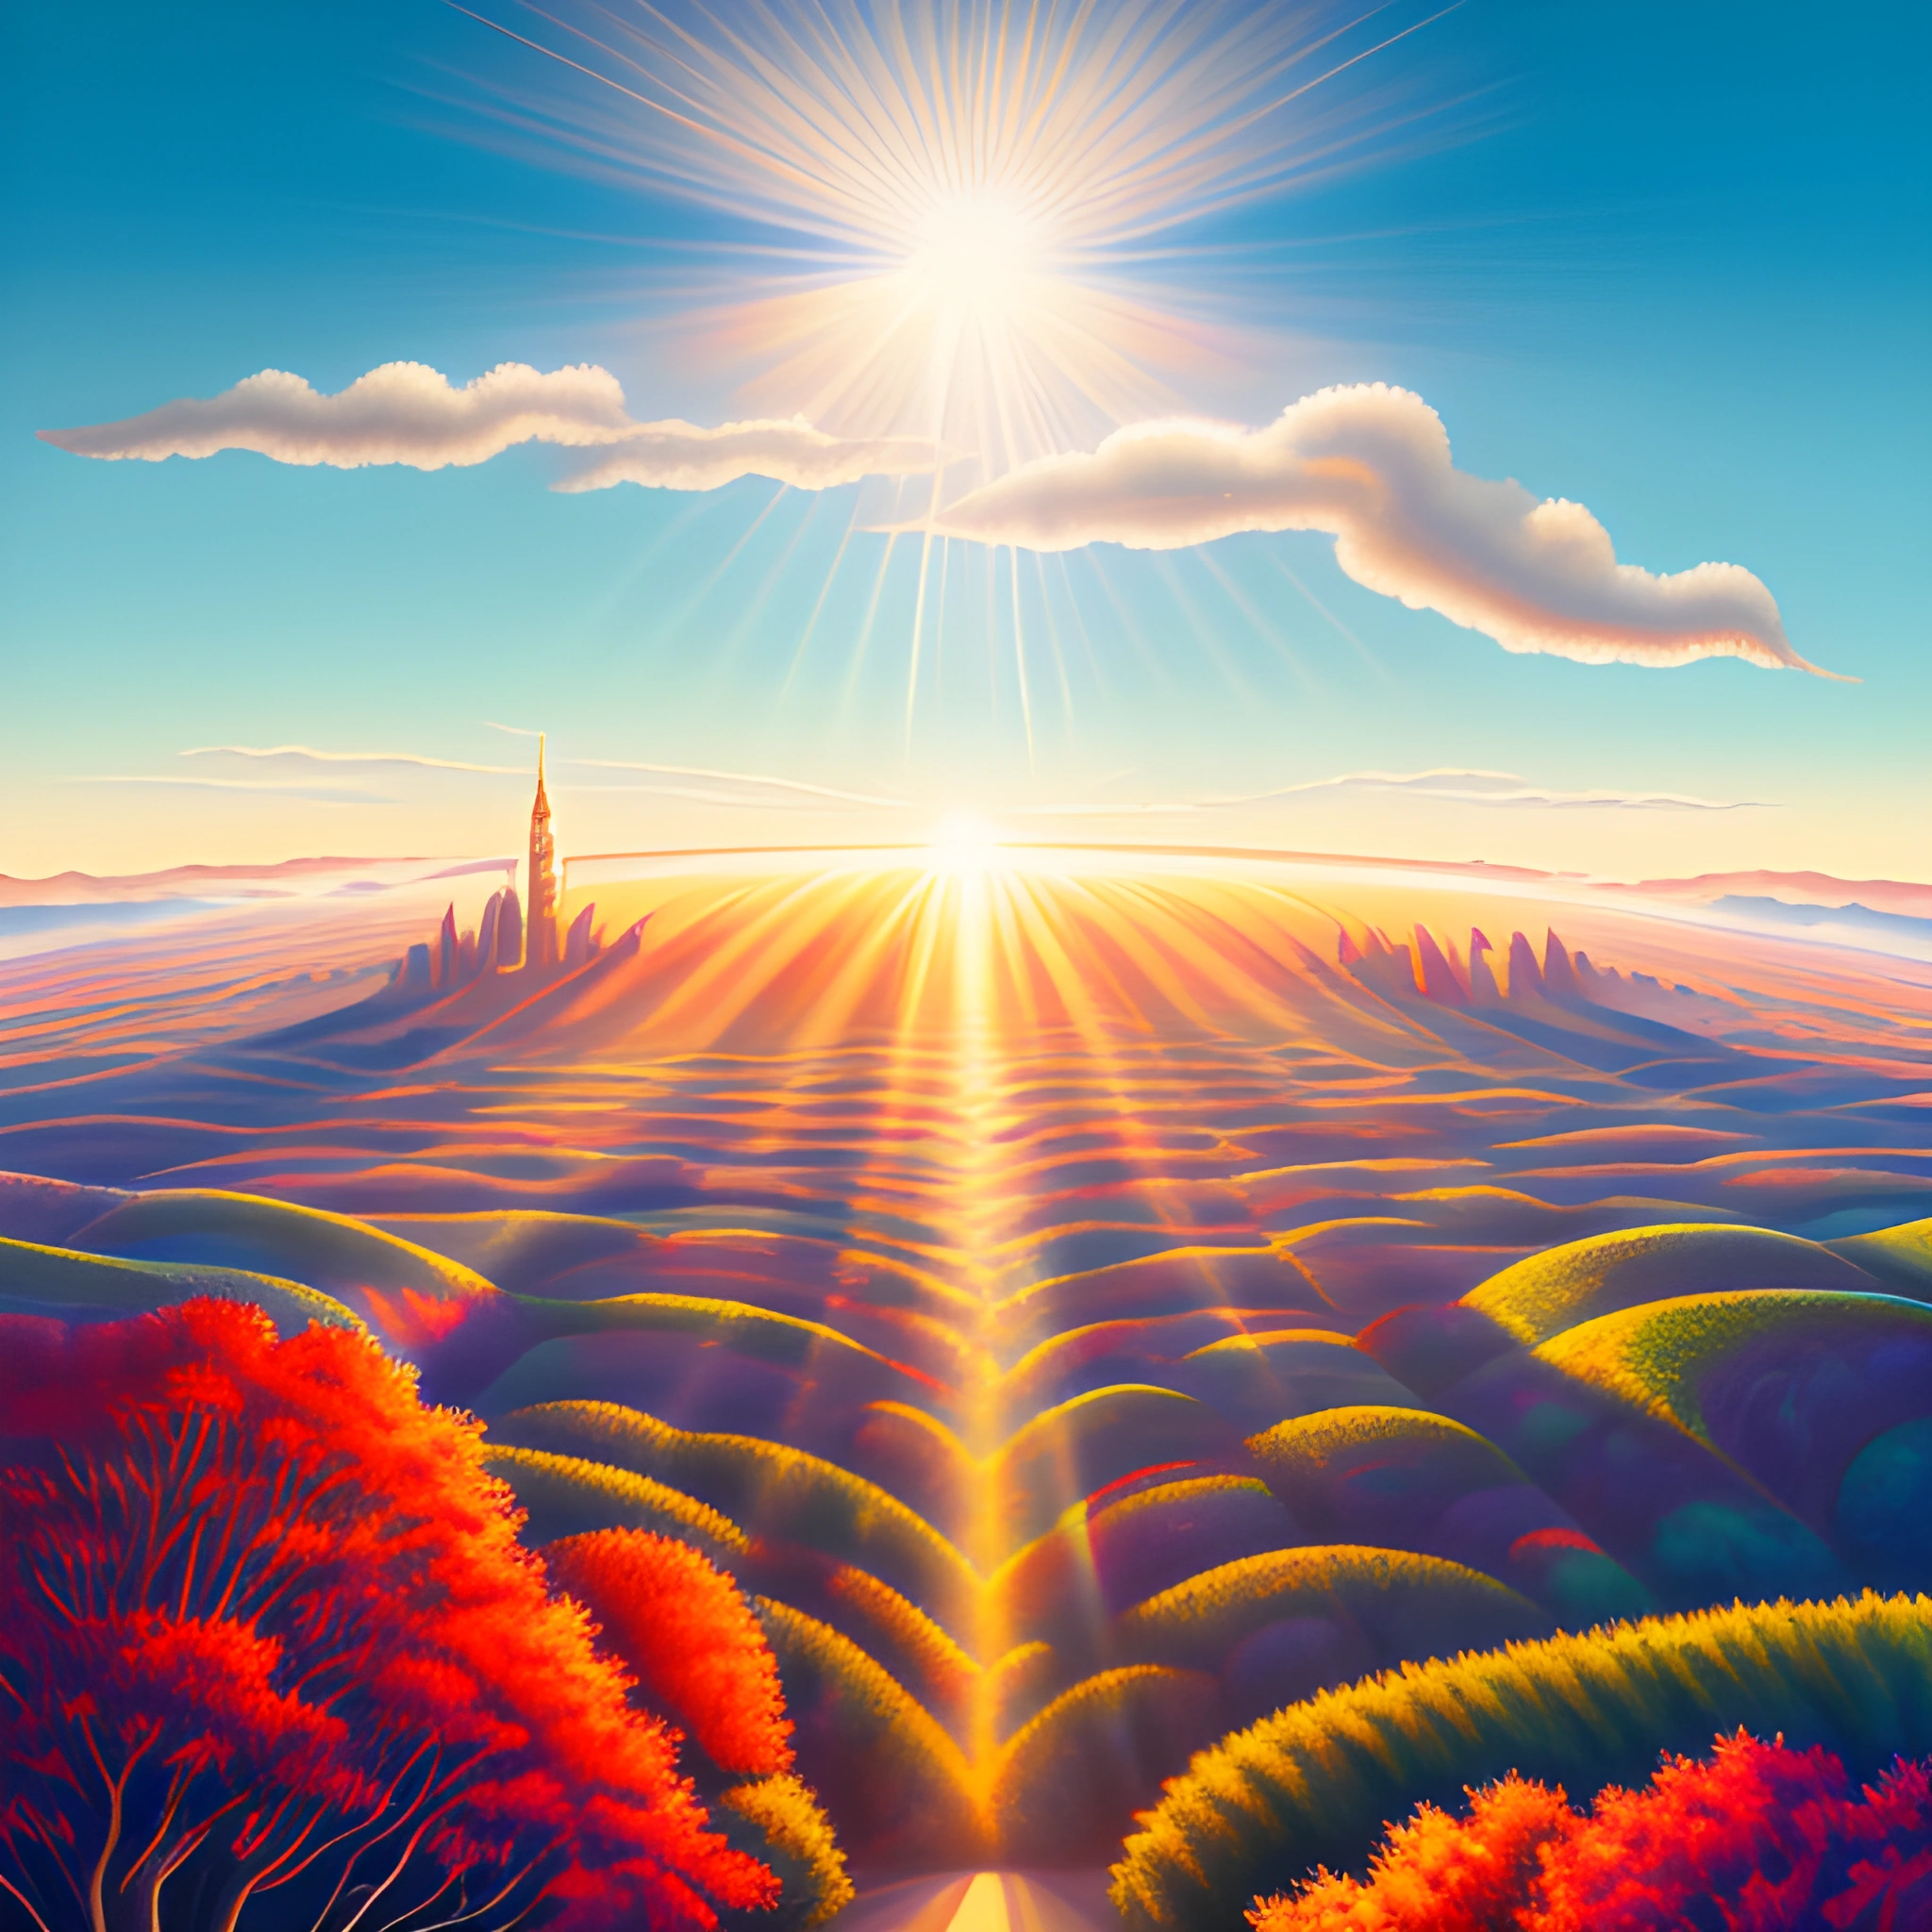 painting of a sun setting over a valley with trees and hills